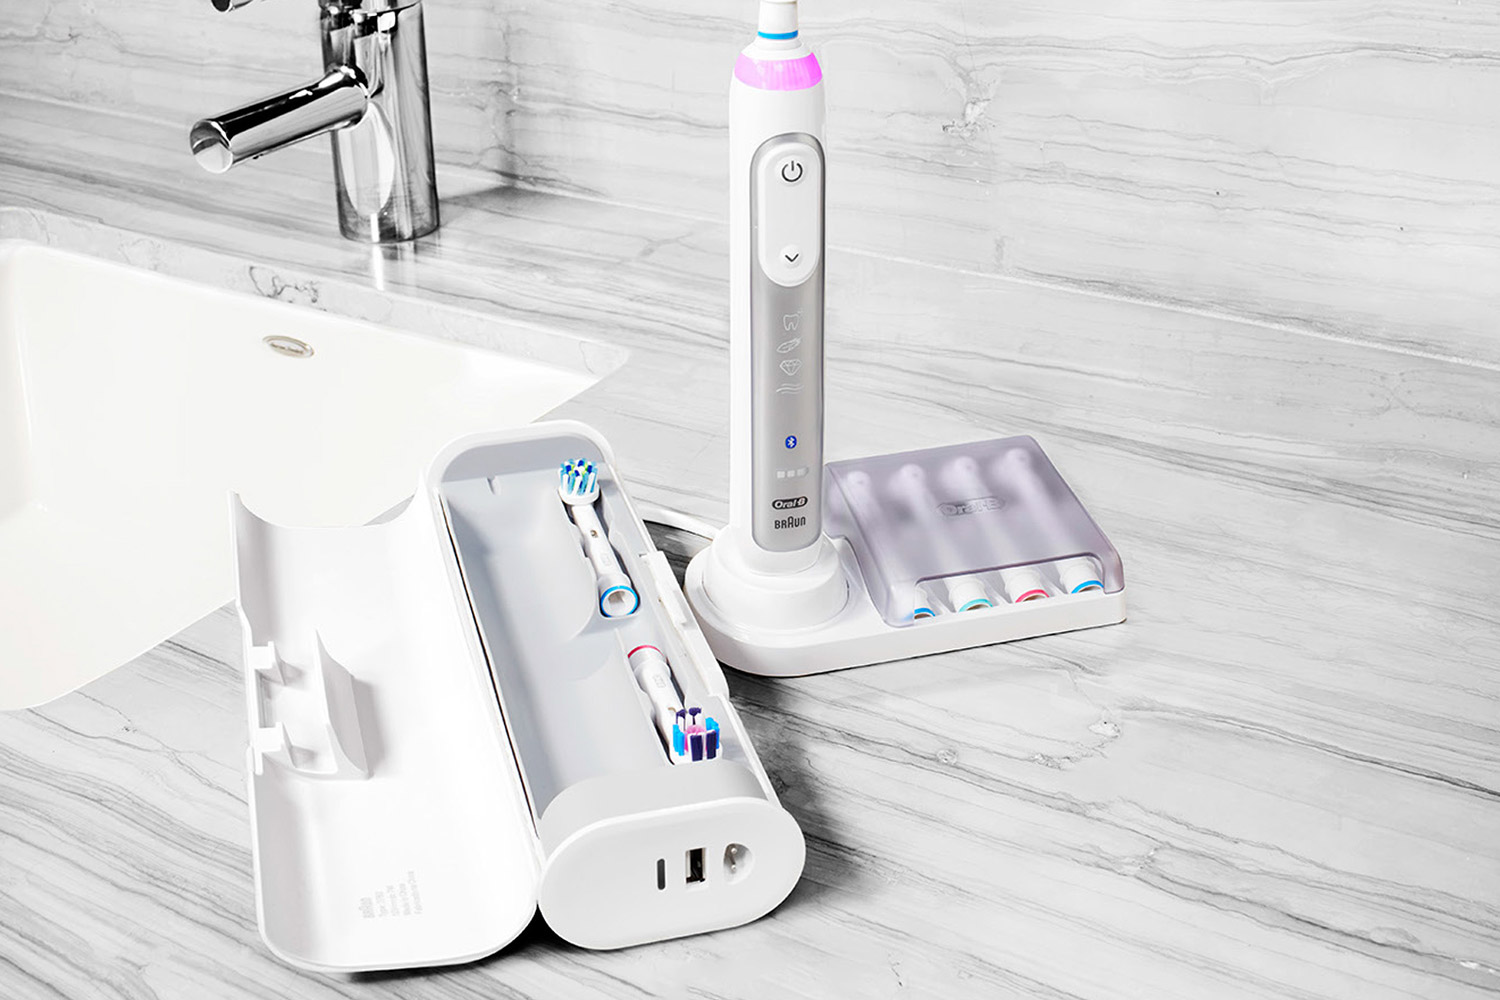 oral b genius toothbrush location tracking technology lifestyle 4